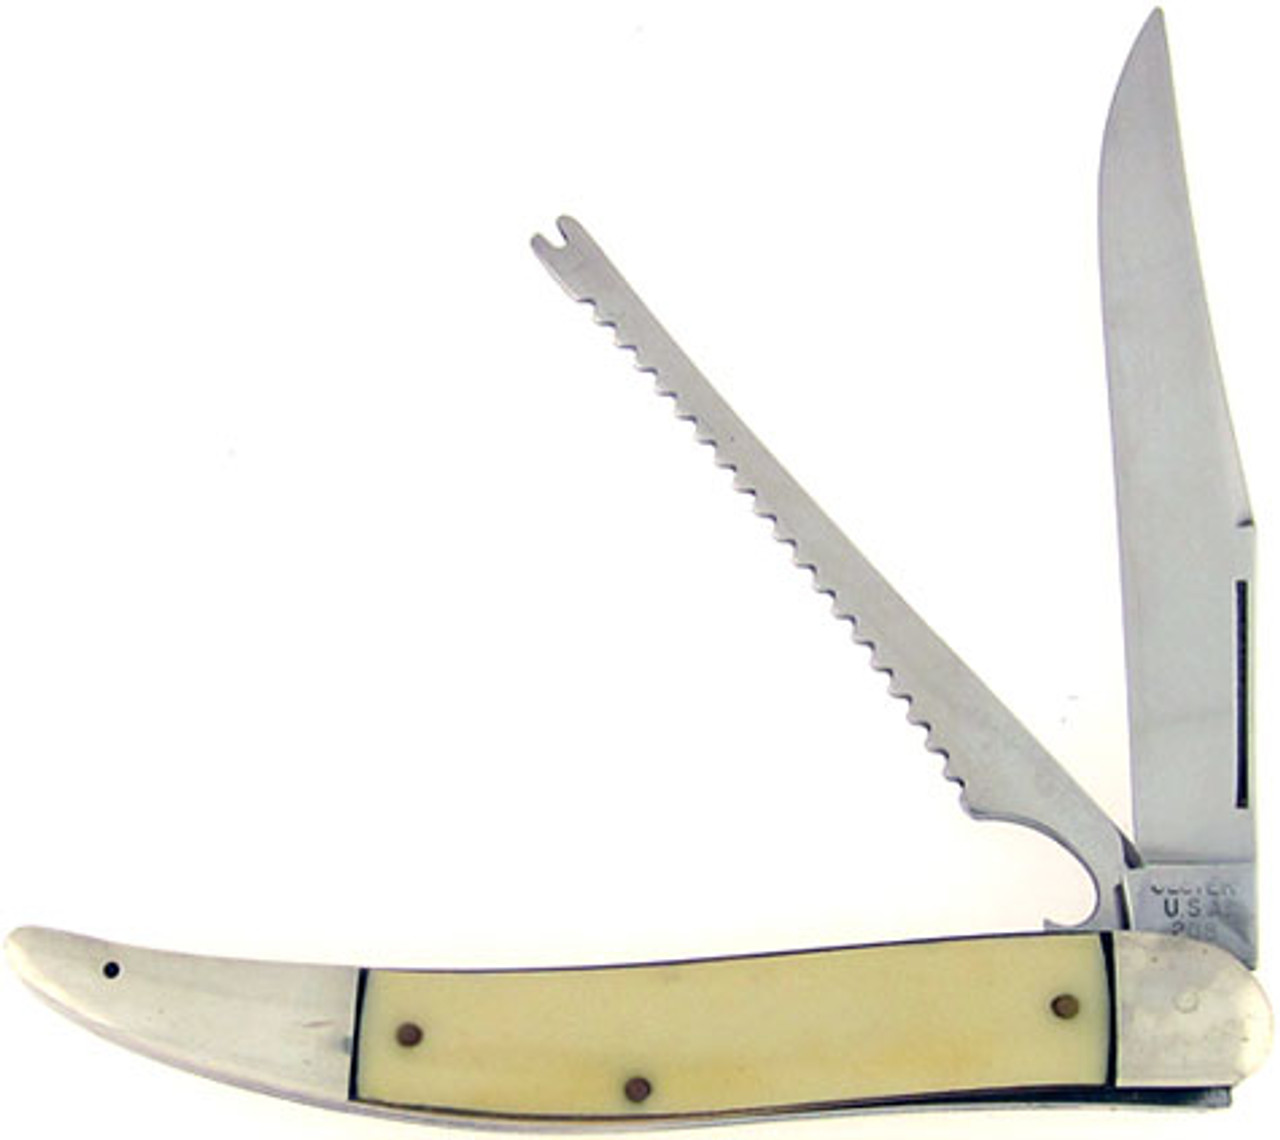 Ulster Large Toothpick Fish Knife